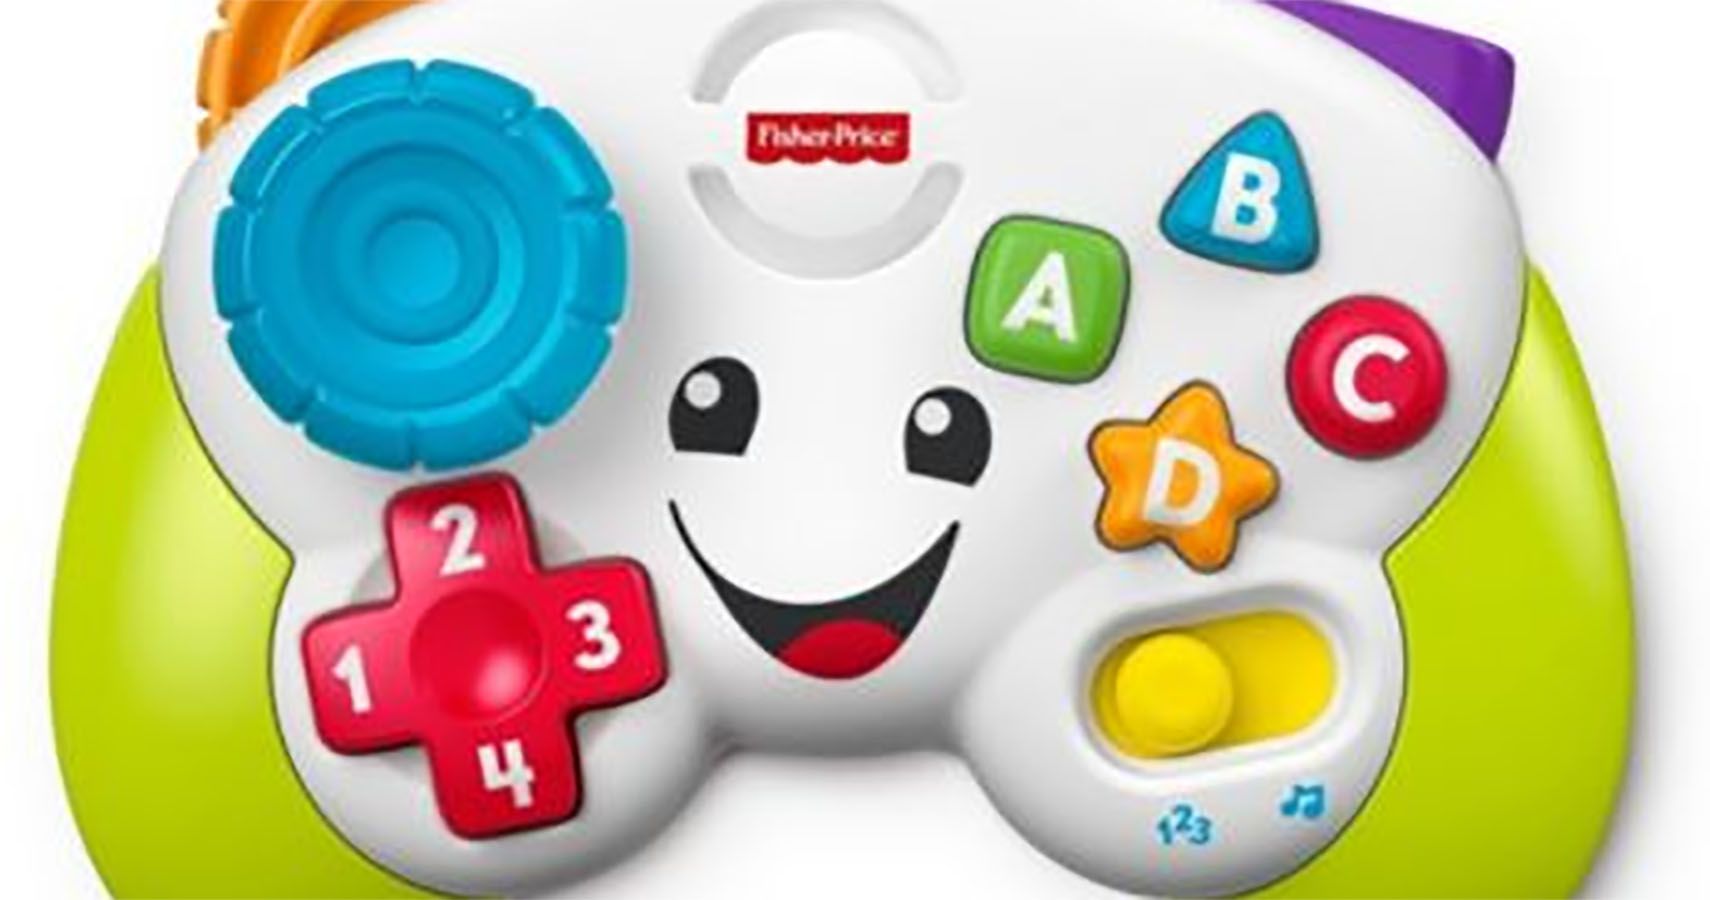 Fisher-Price toy gaming controller